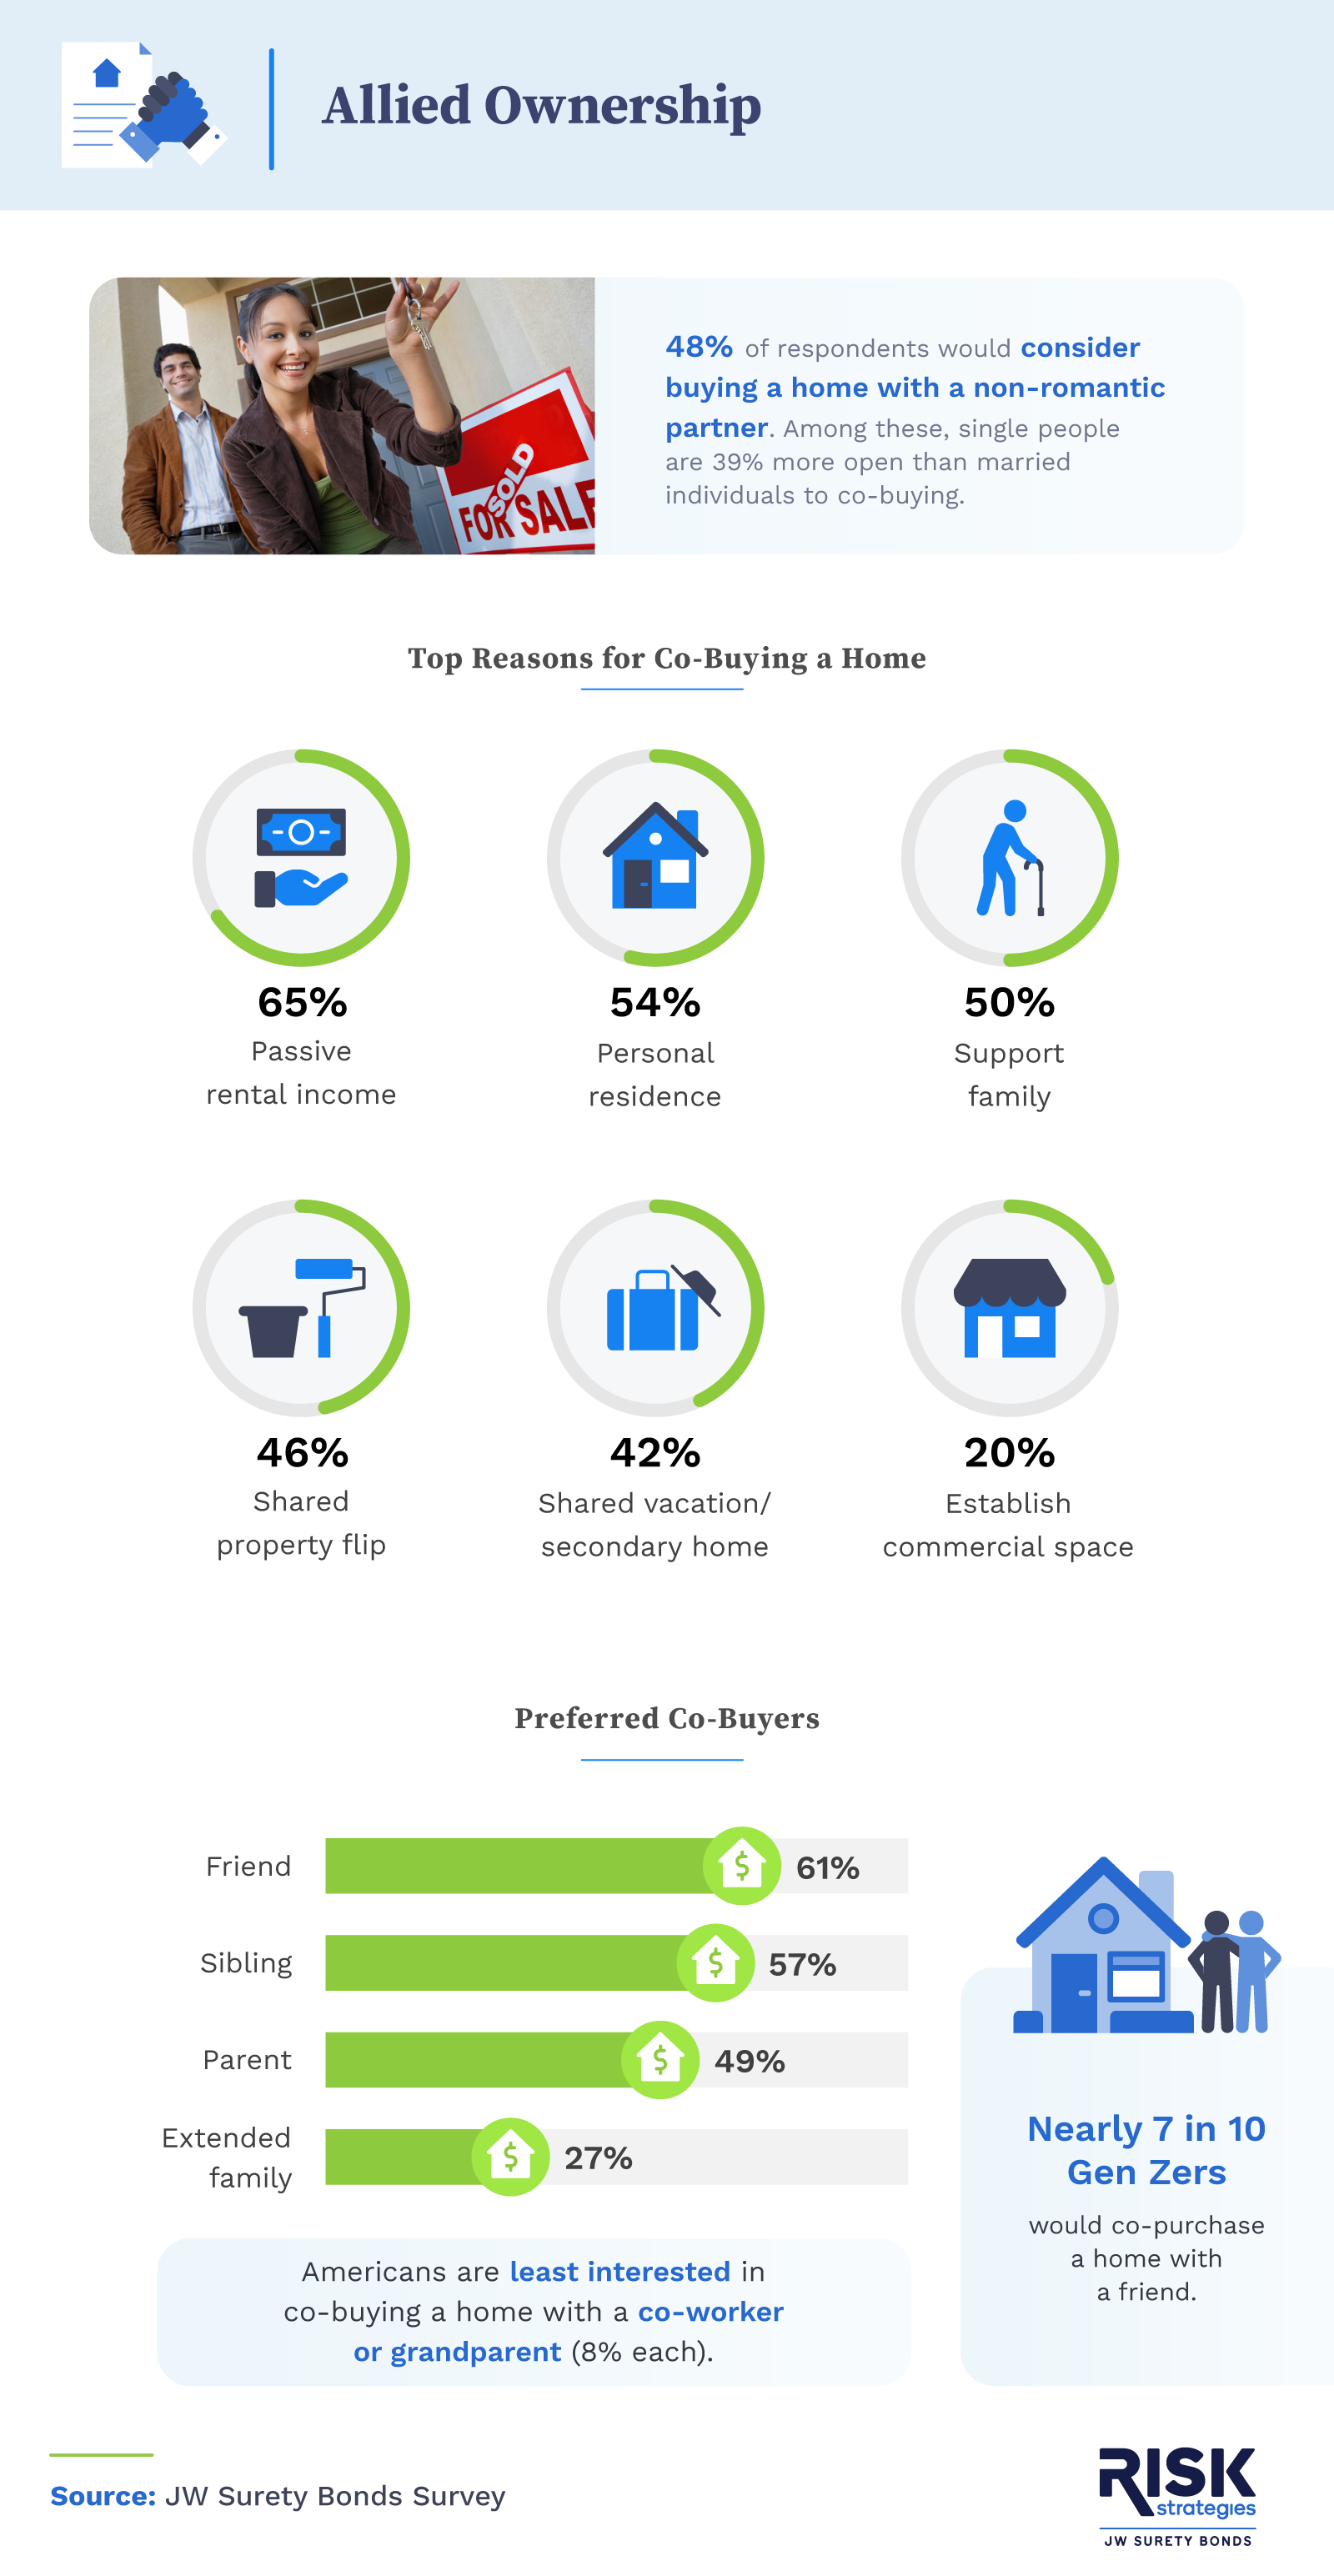 This infographic explores interest in co-buying property with non-romantic partners.